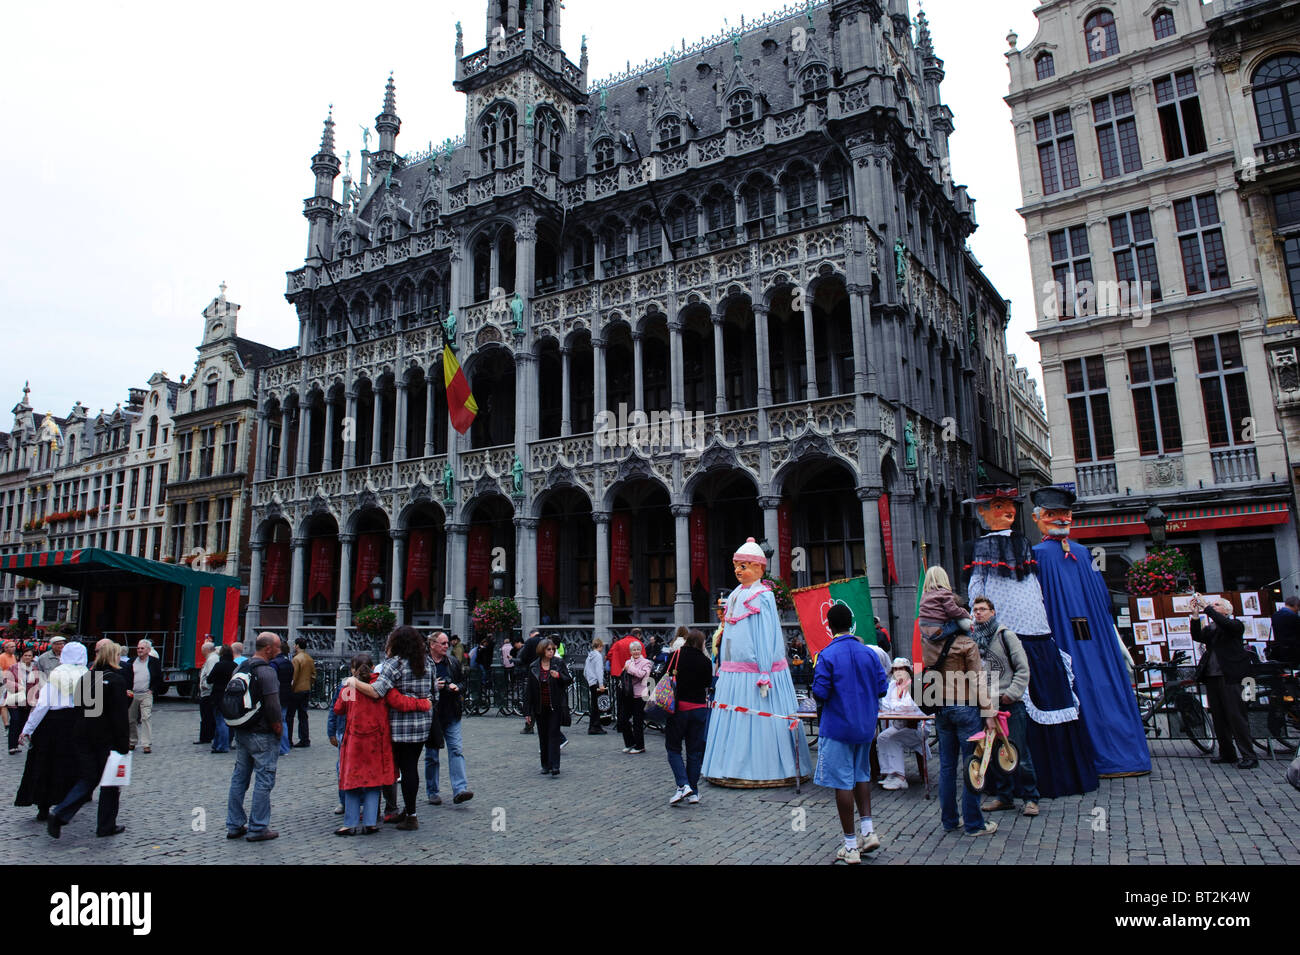 The Grand Place In Brussels BT2K4W 